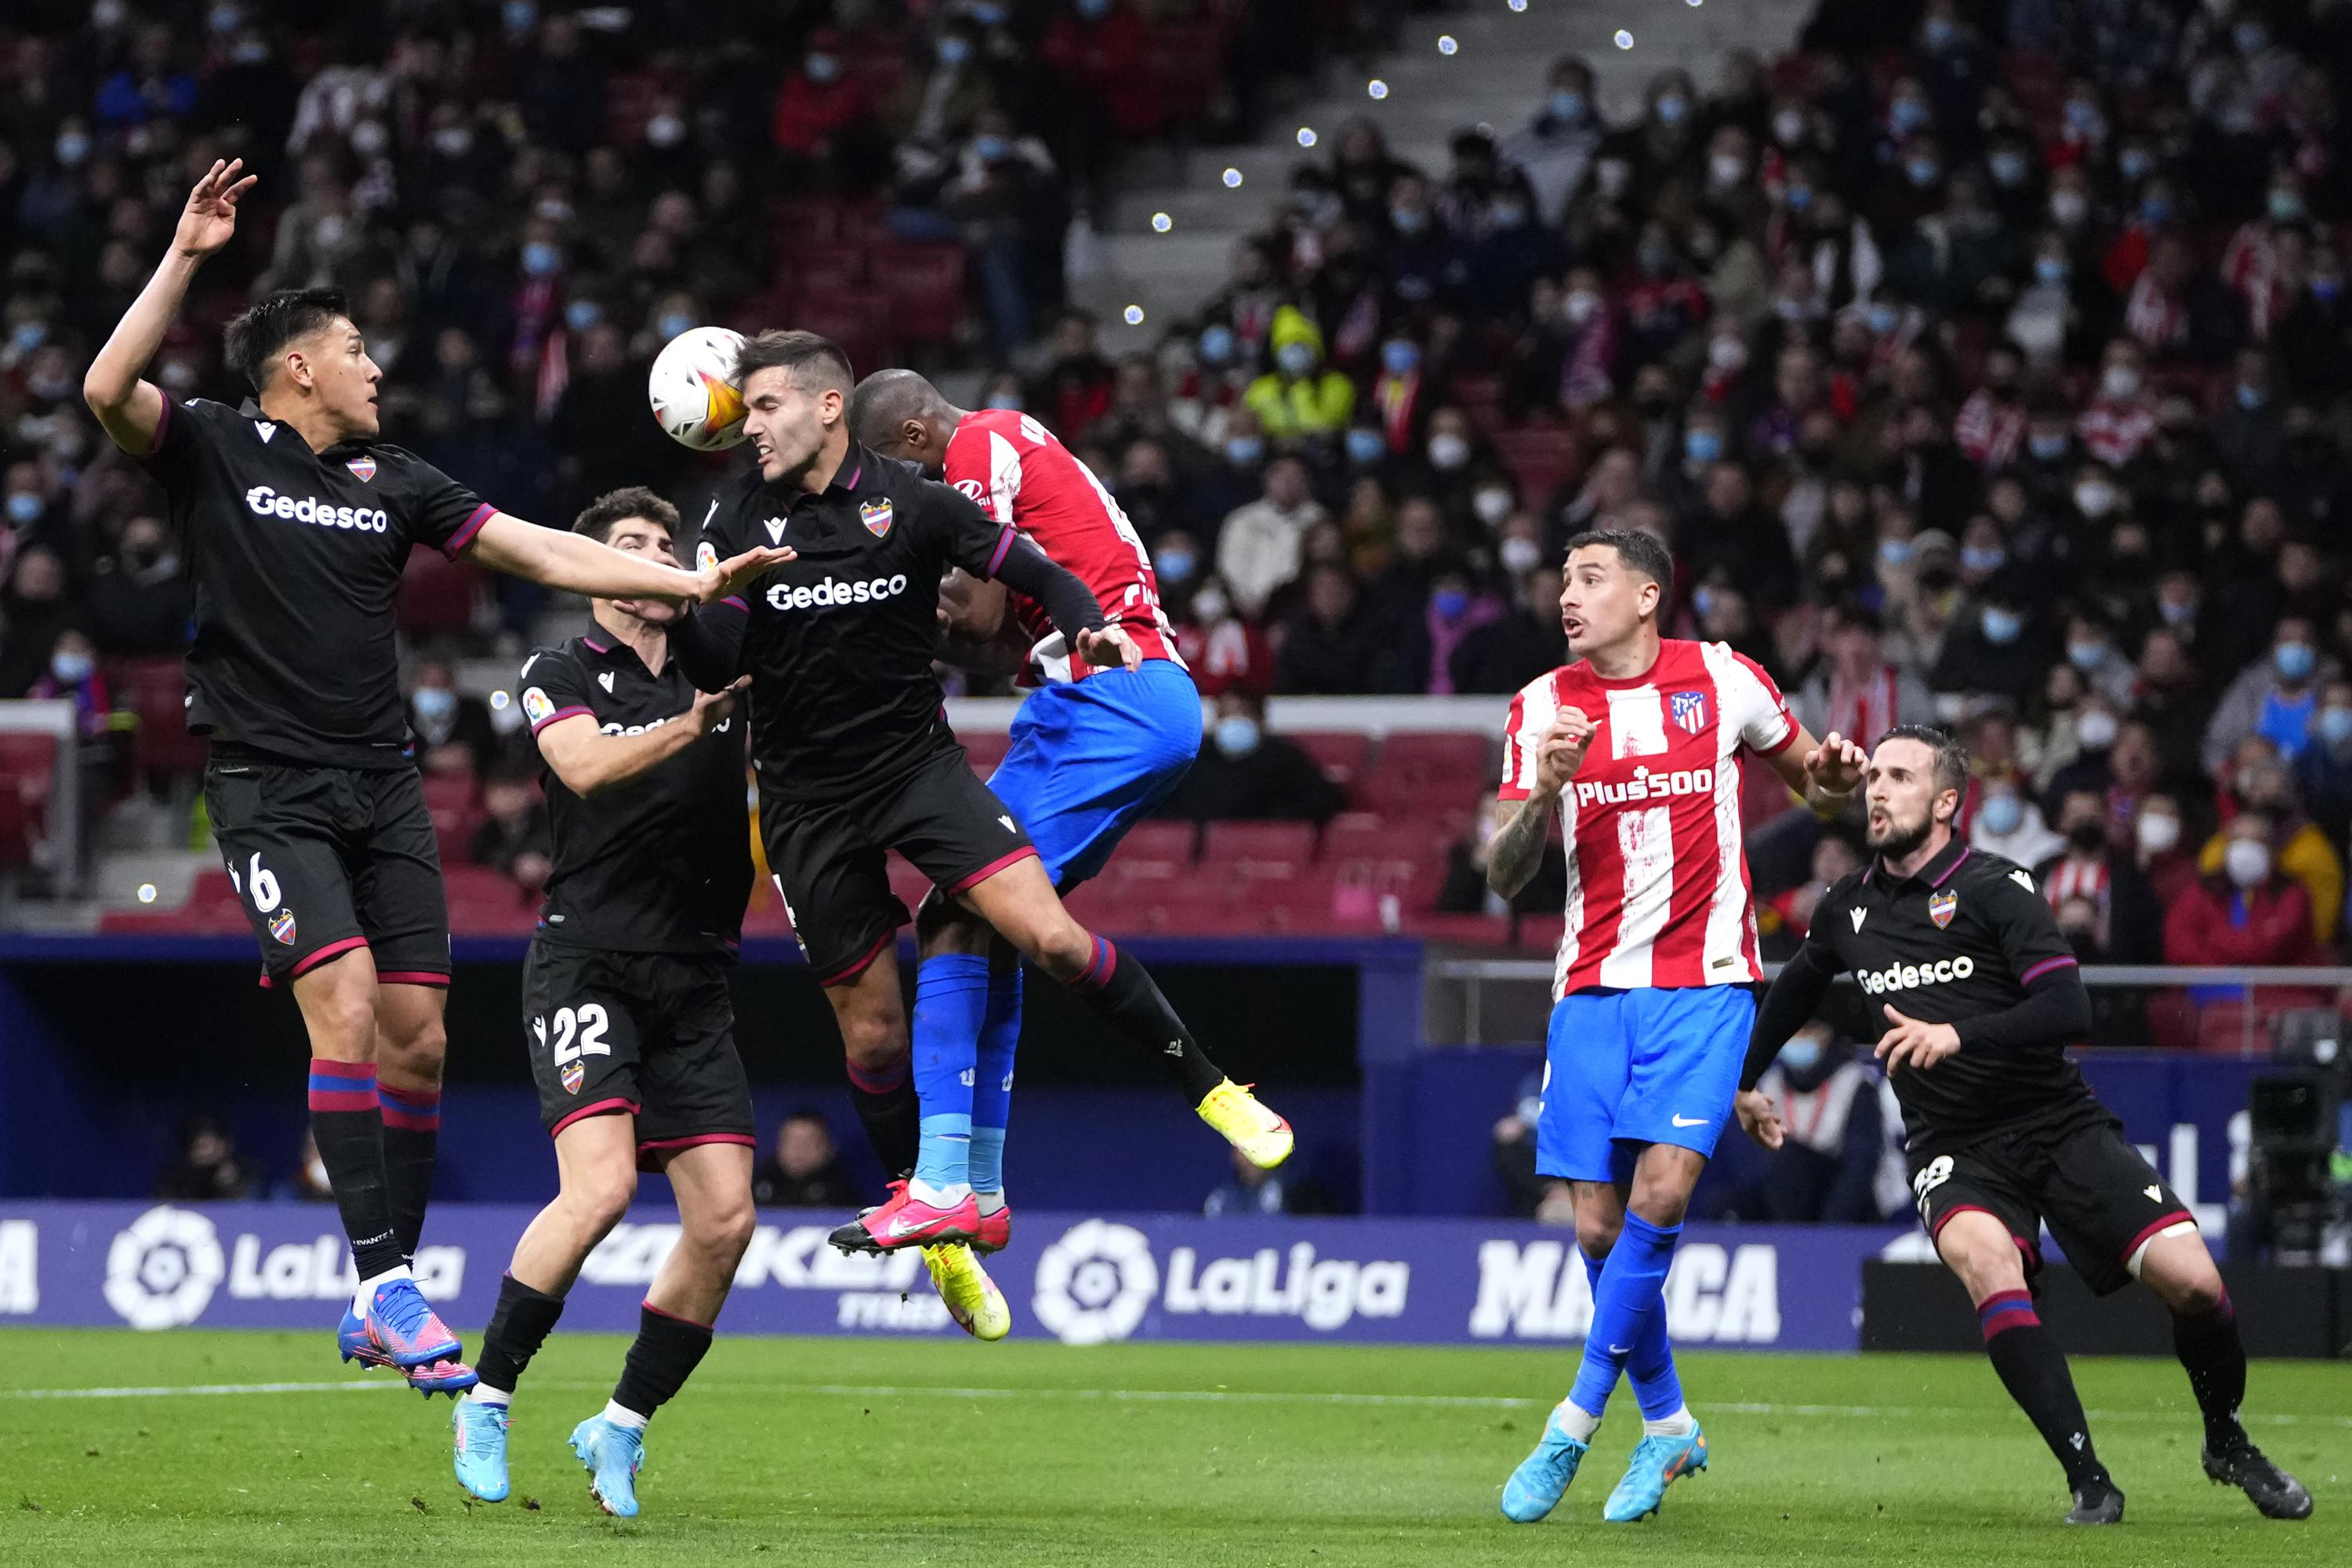 Atletico Madrid were upset by bottom-placed Levante on Wednesday night as poor form continues